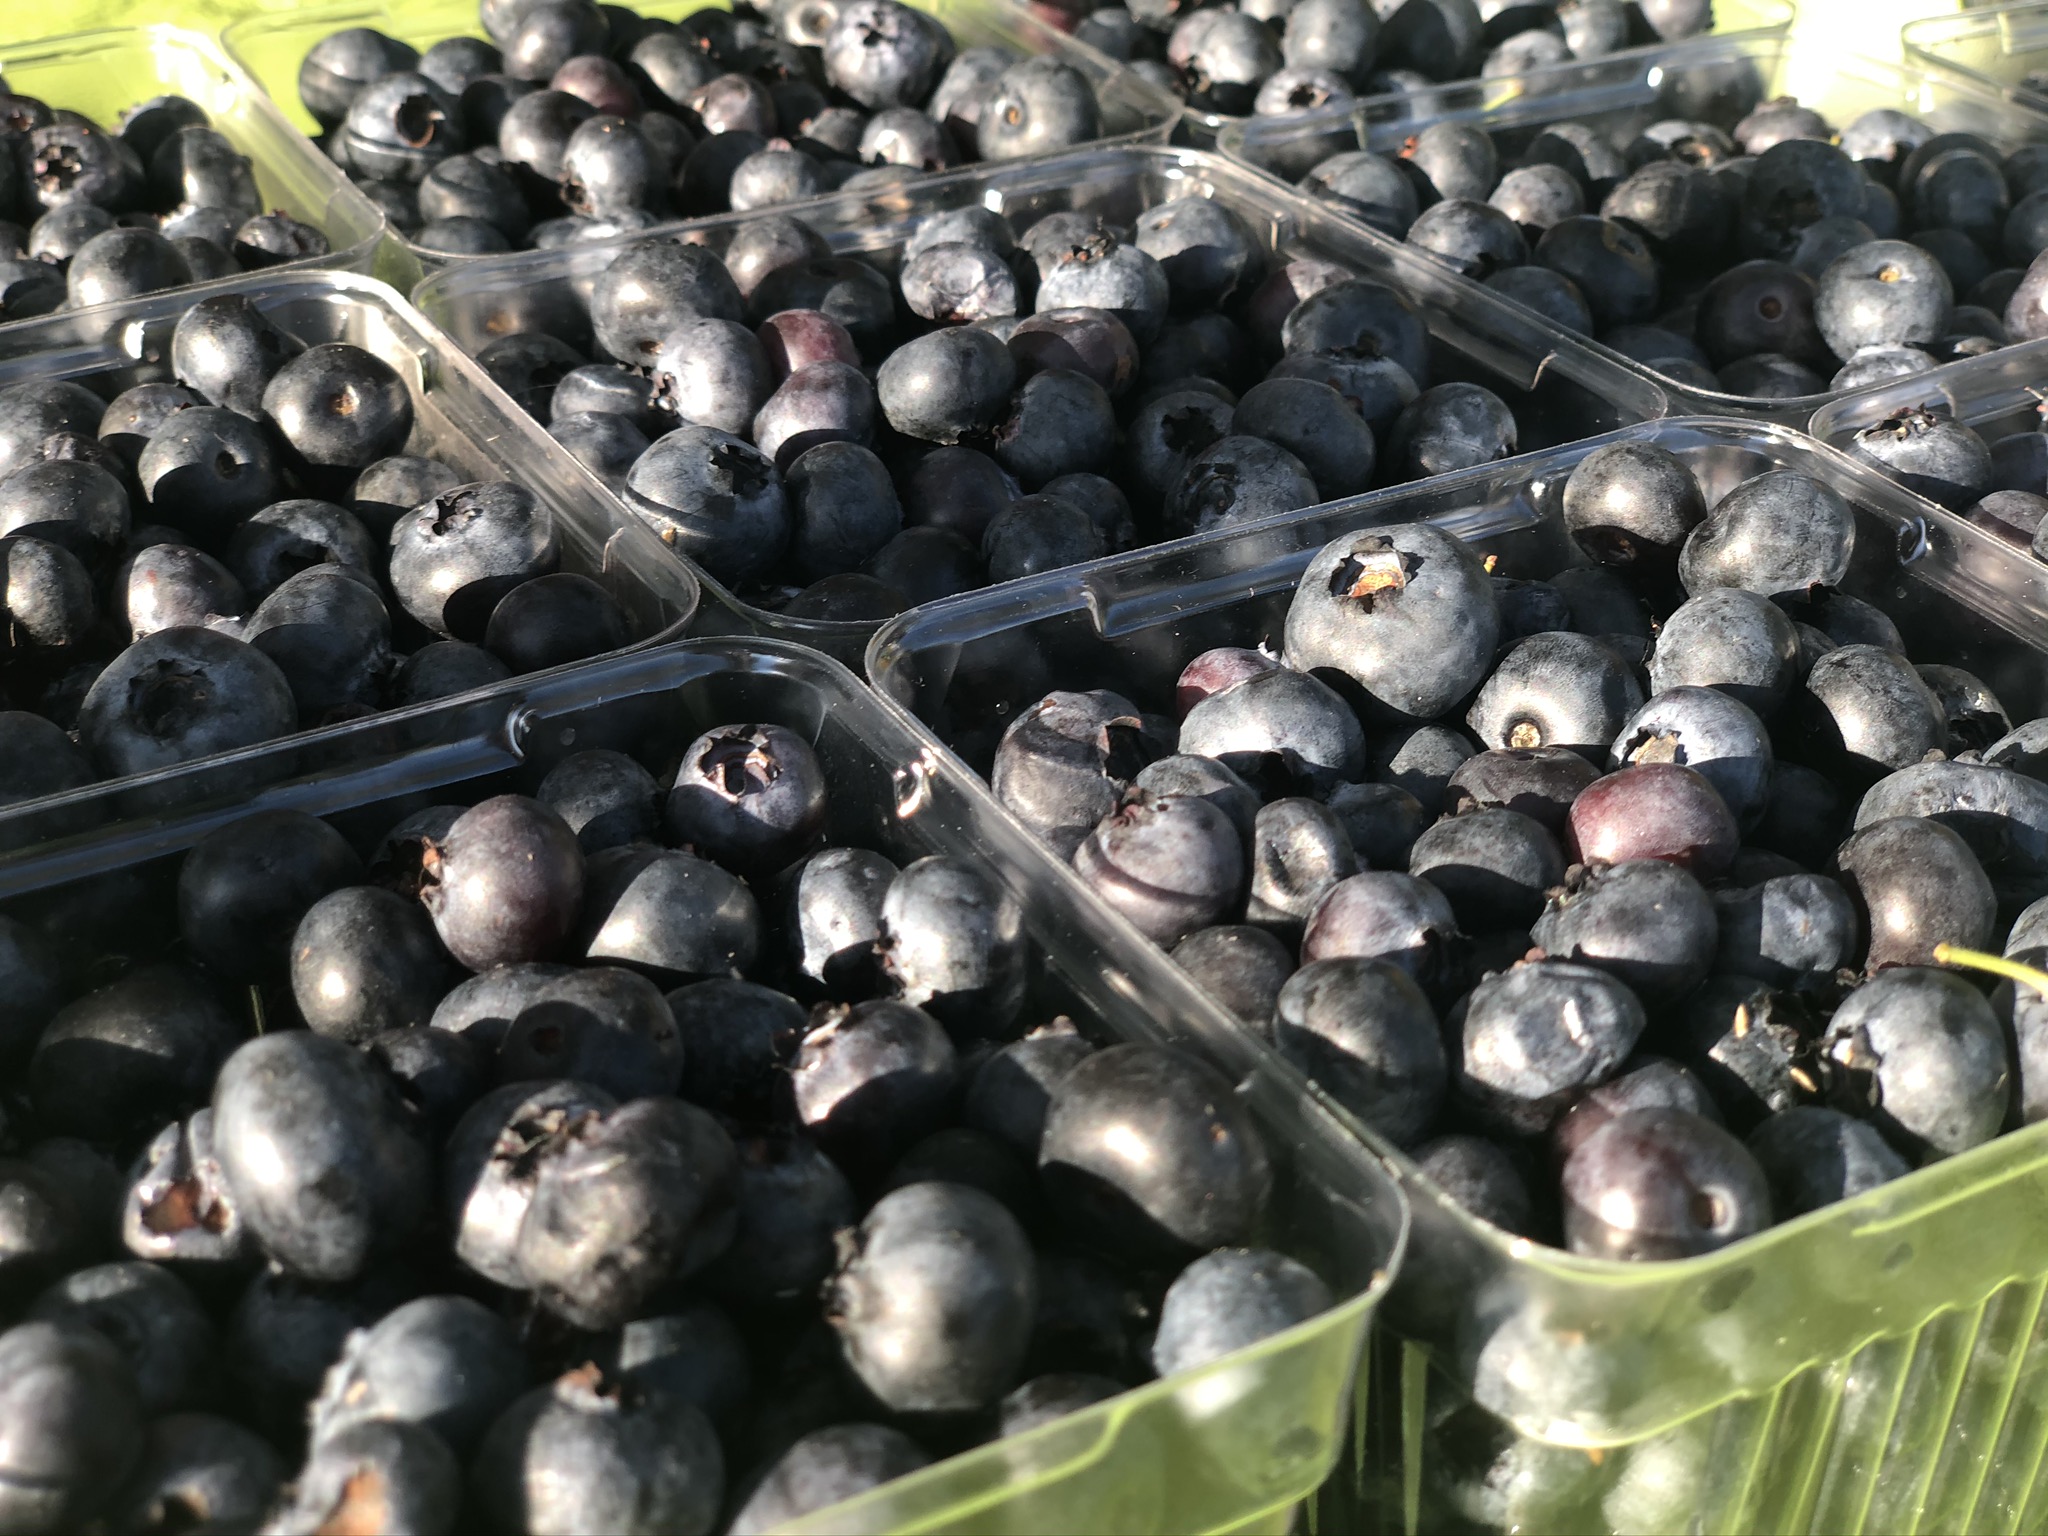 Several plastic containers holding fresh blueberries for sale at the Urbana's Market in the Square. Photo by Alyssa Buckley.